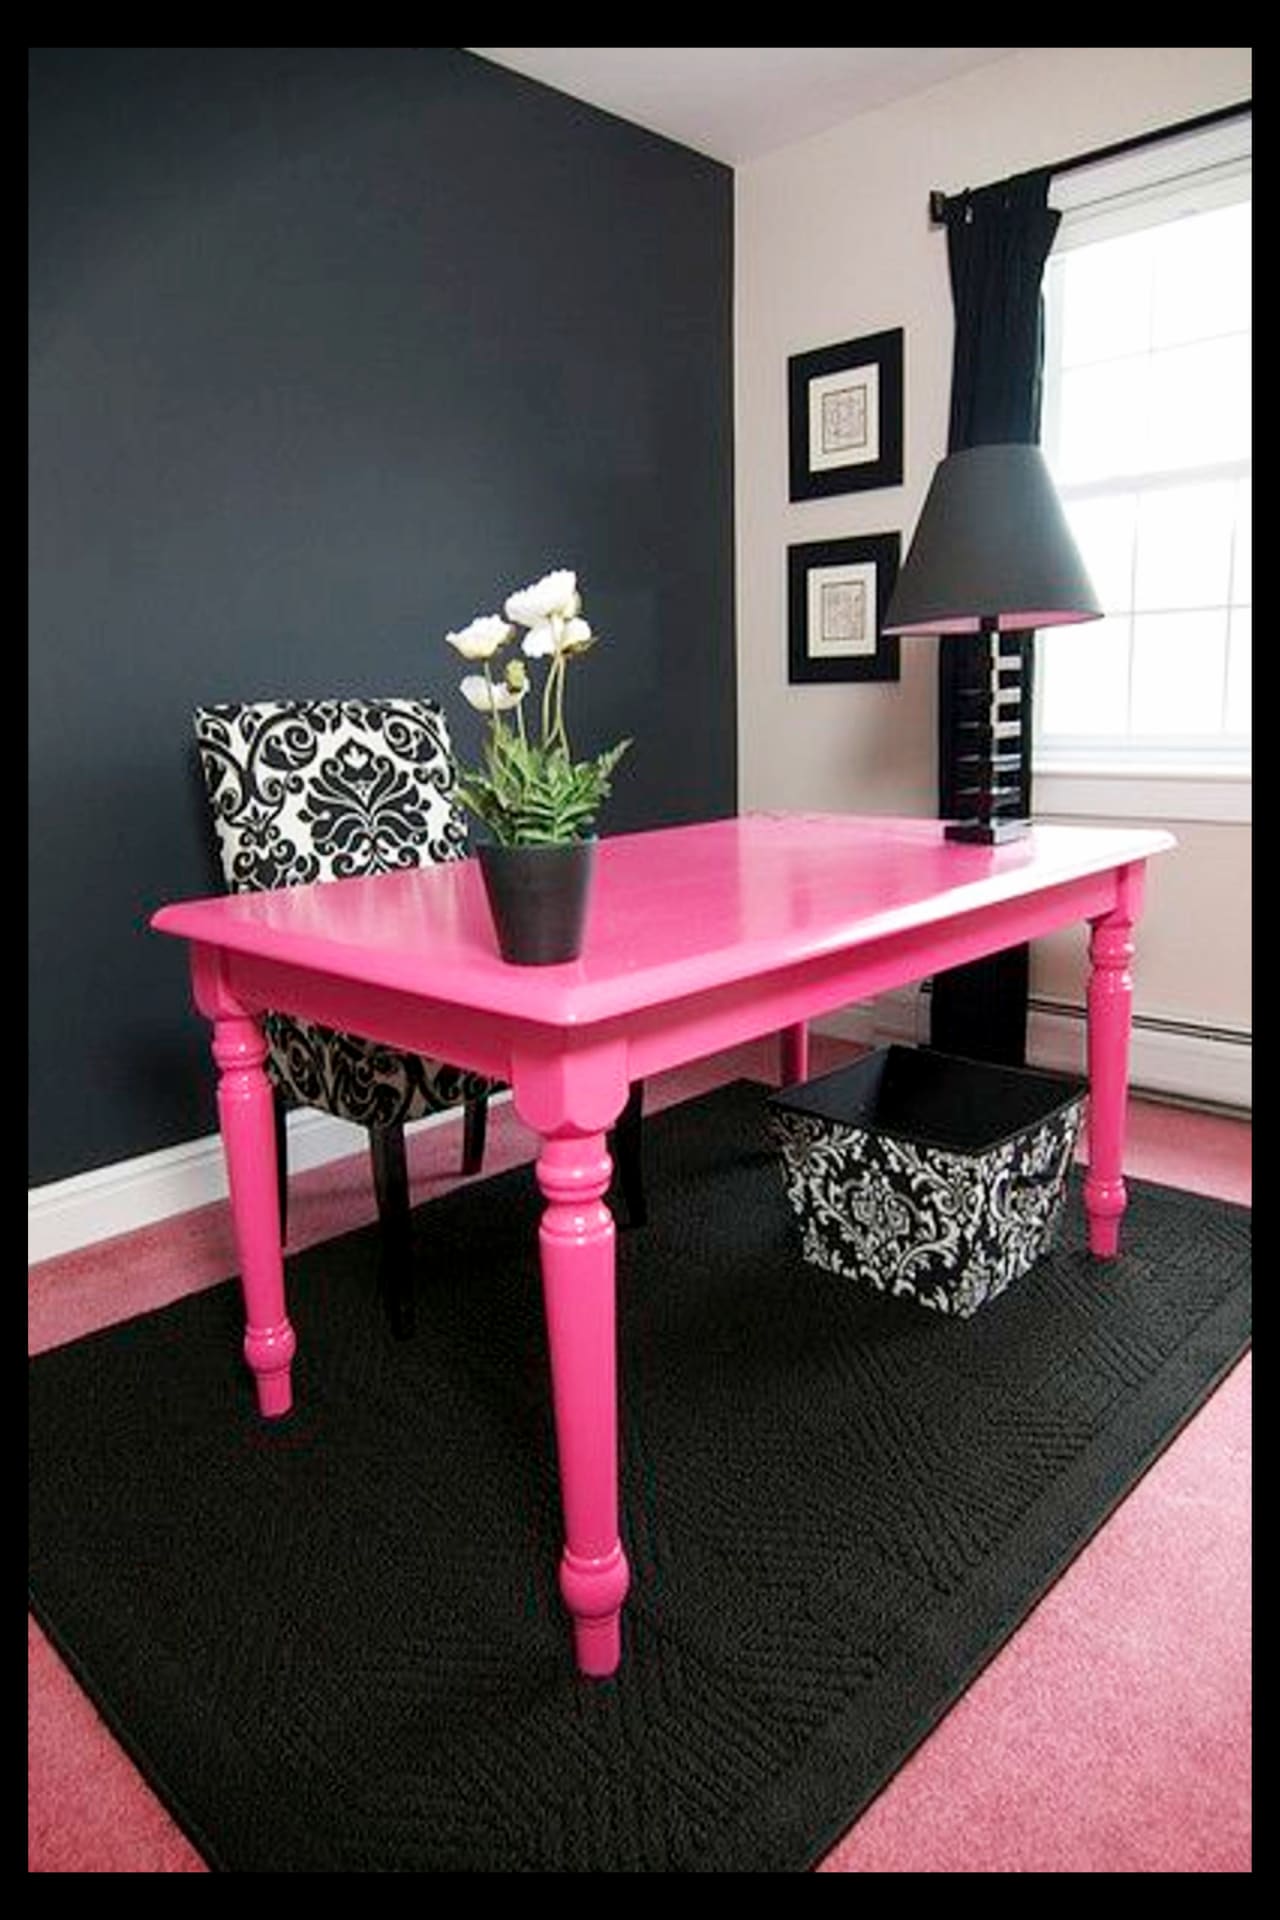 Home Office Ideas for Women (even if you're on a budget) Pretty small spaces and glam and elegant home office inspiration - bright hot pink and black home office decorating ideas